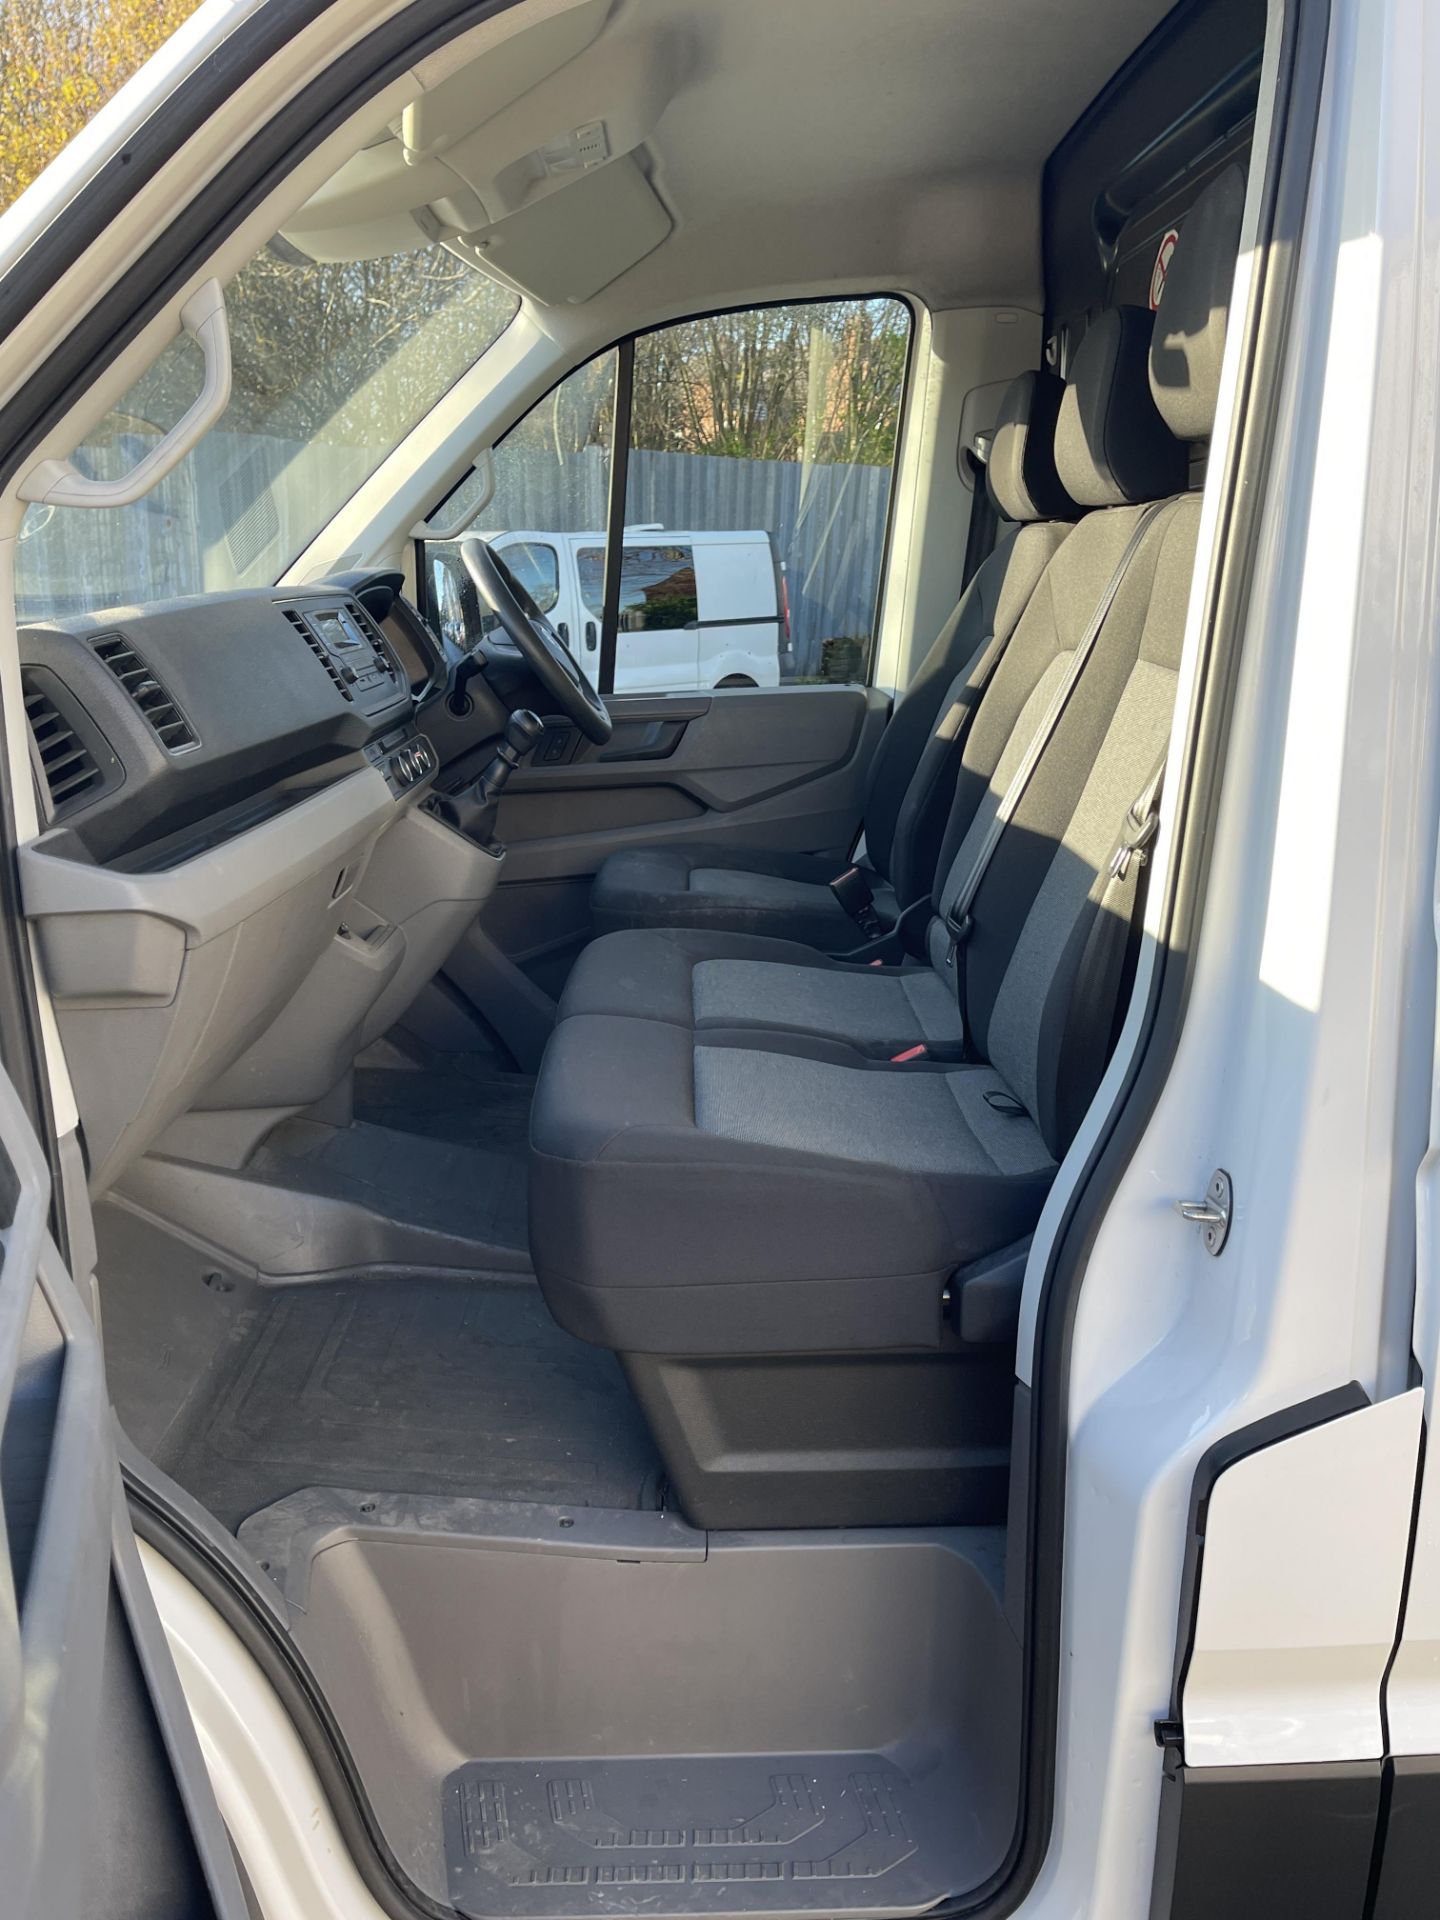 2018 - VW Crafter CR35 102PS Trend Line LWB TDI - Image 33 of 34